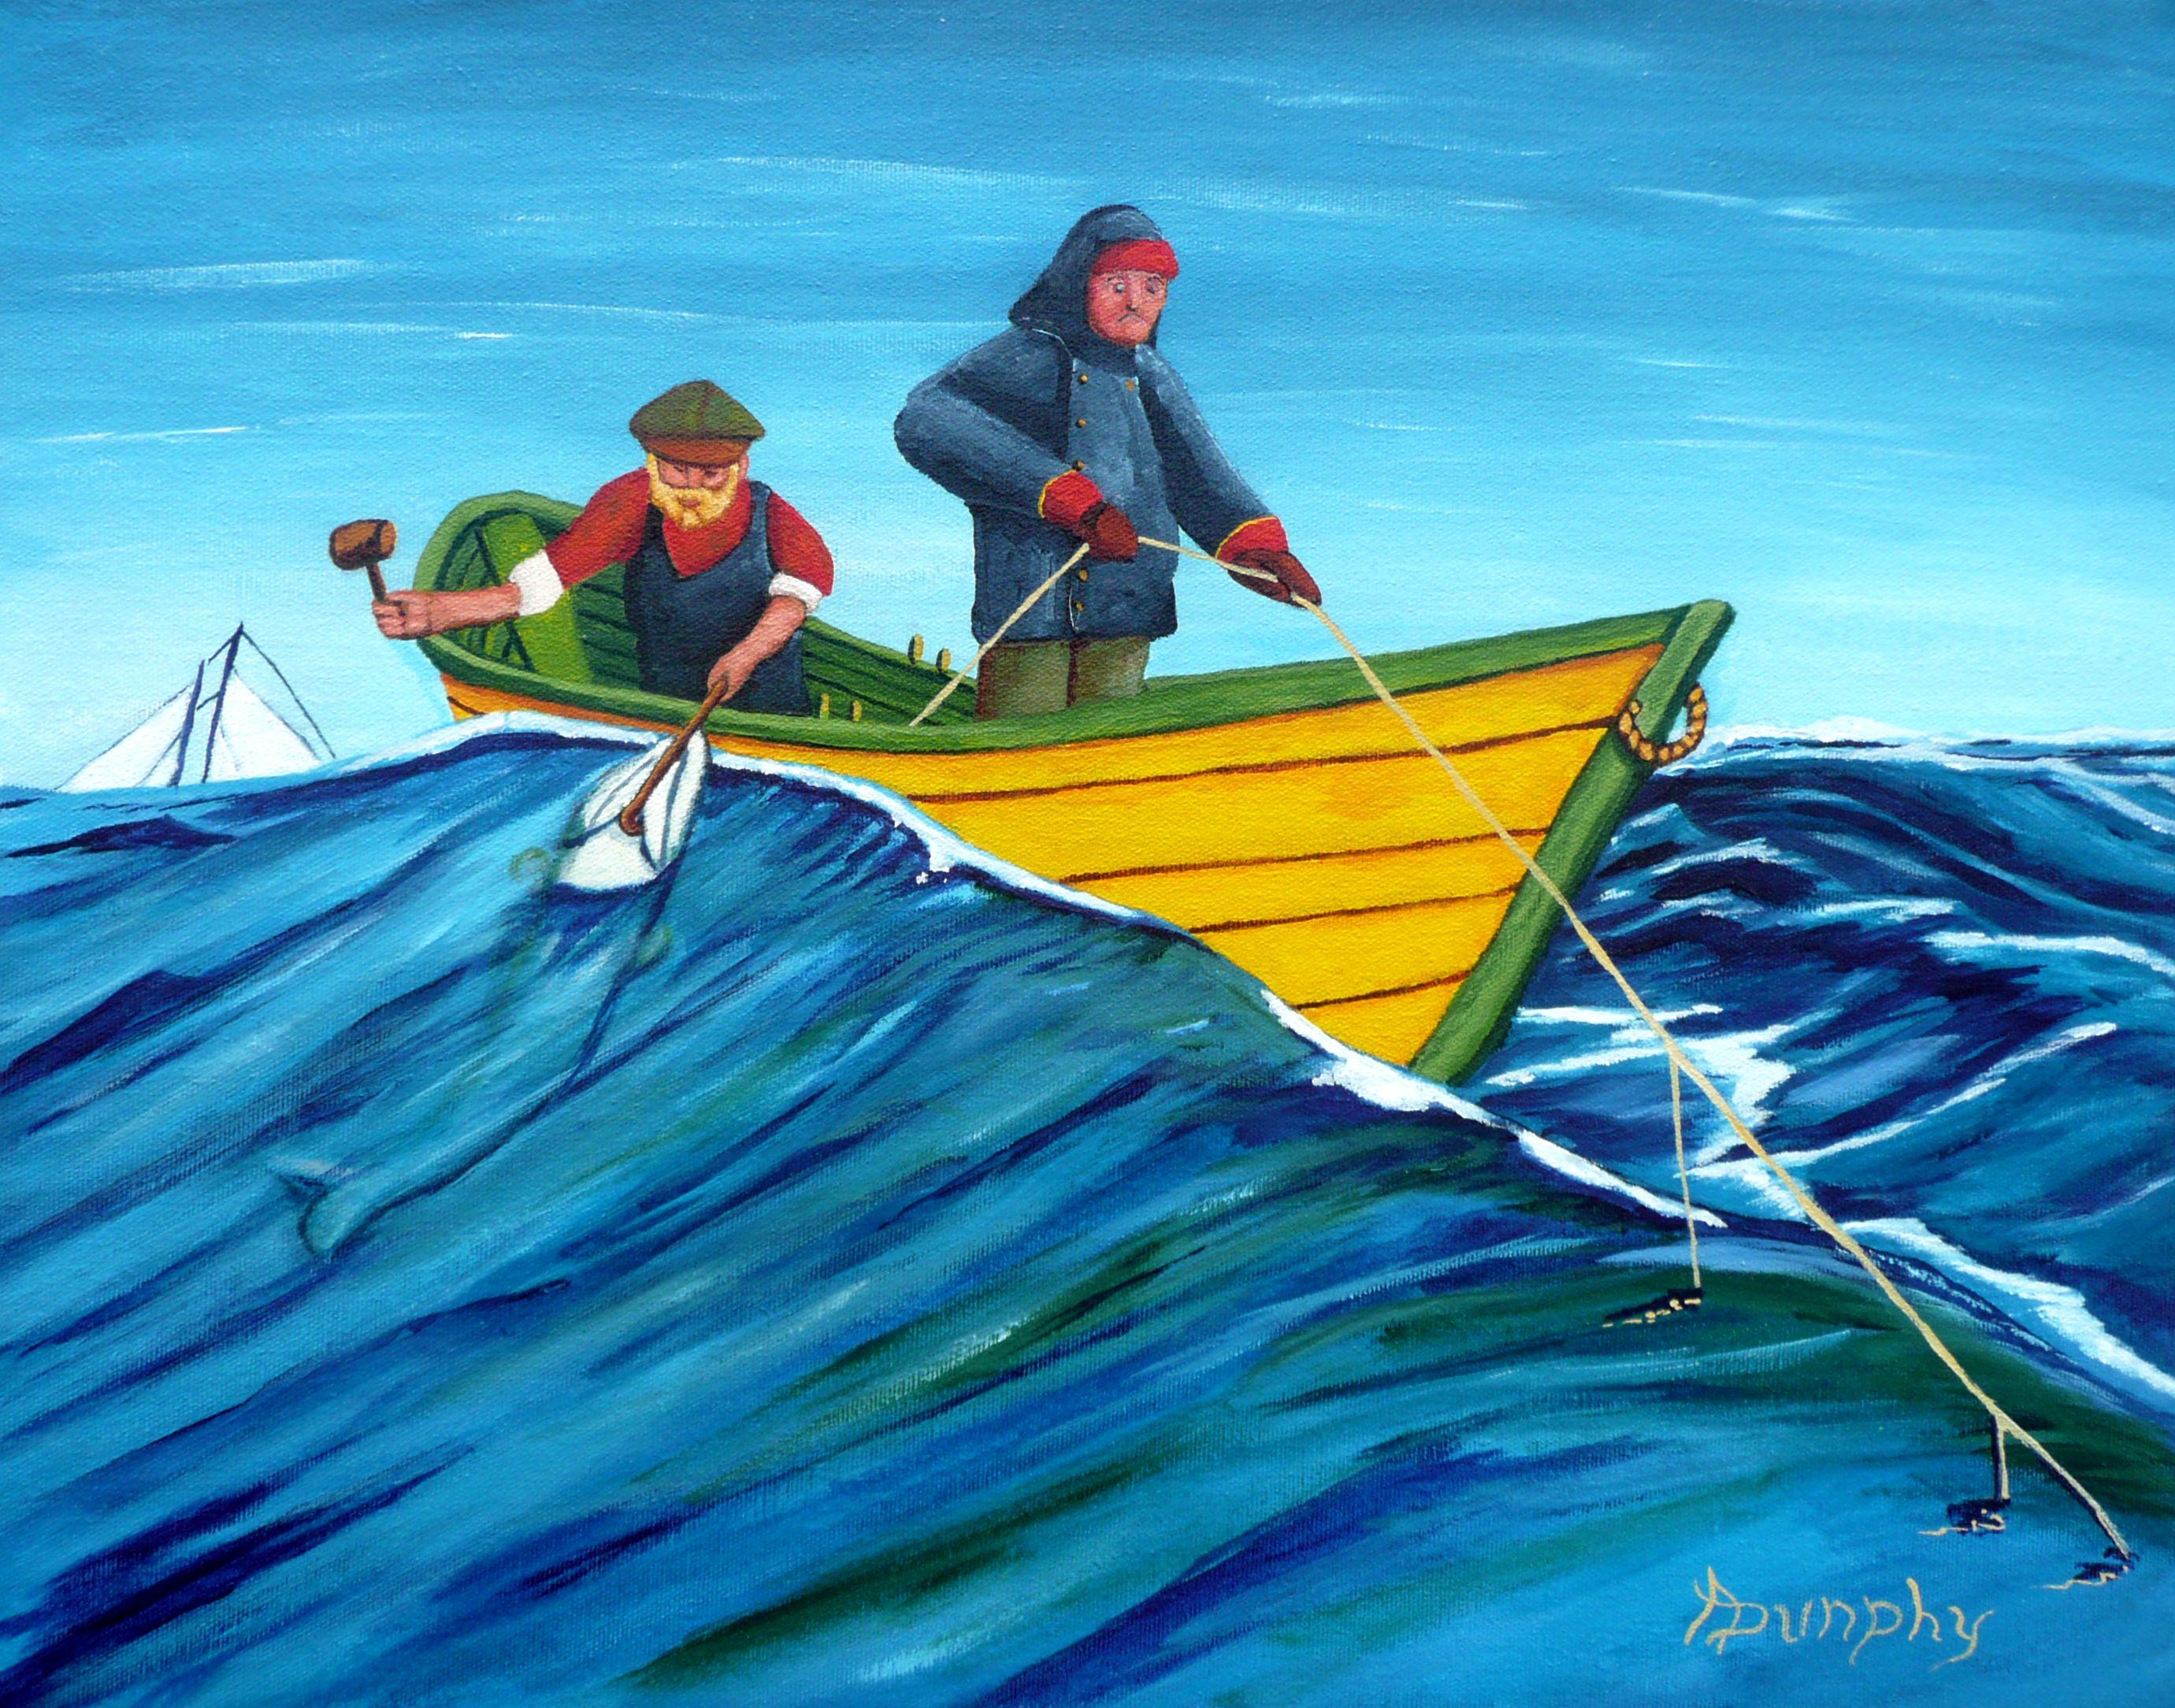 On the Grand Banks, off the coast of Newfoundland, fishermen leave their schooners to board their dories in pairs to catch cod using handlines. This maritime painting has been created using professional grade acrylics on un-stretched canvas and has